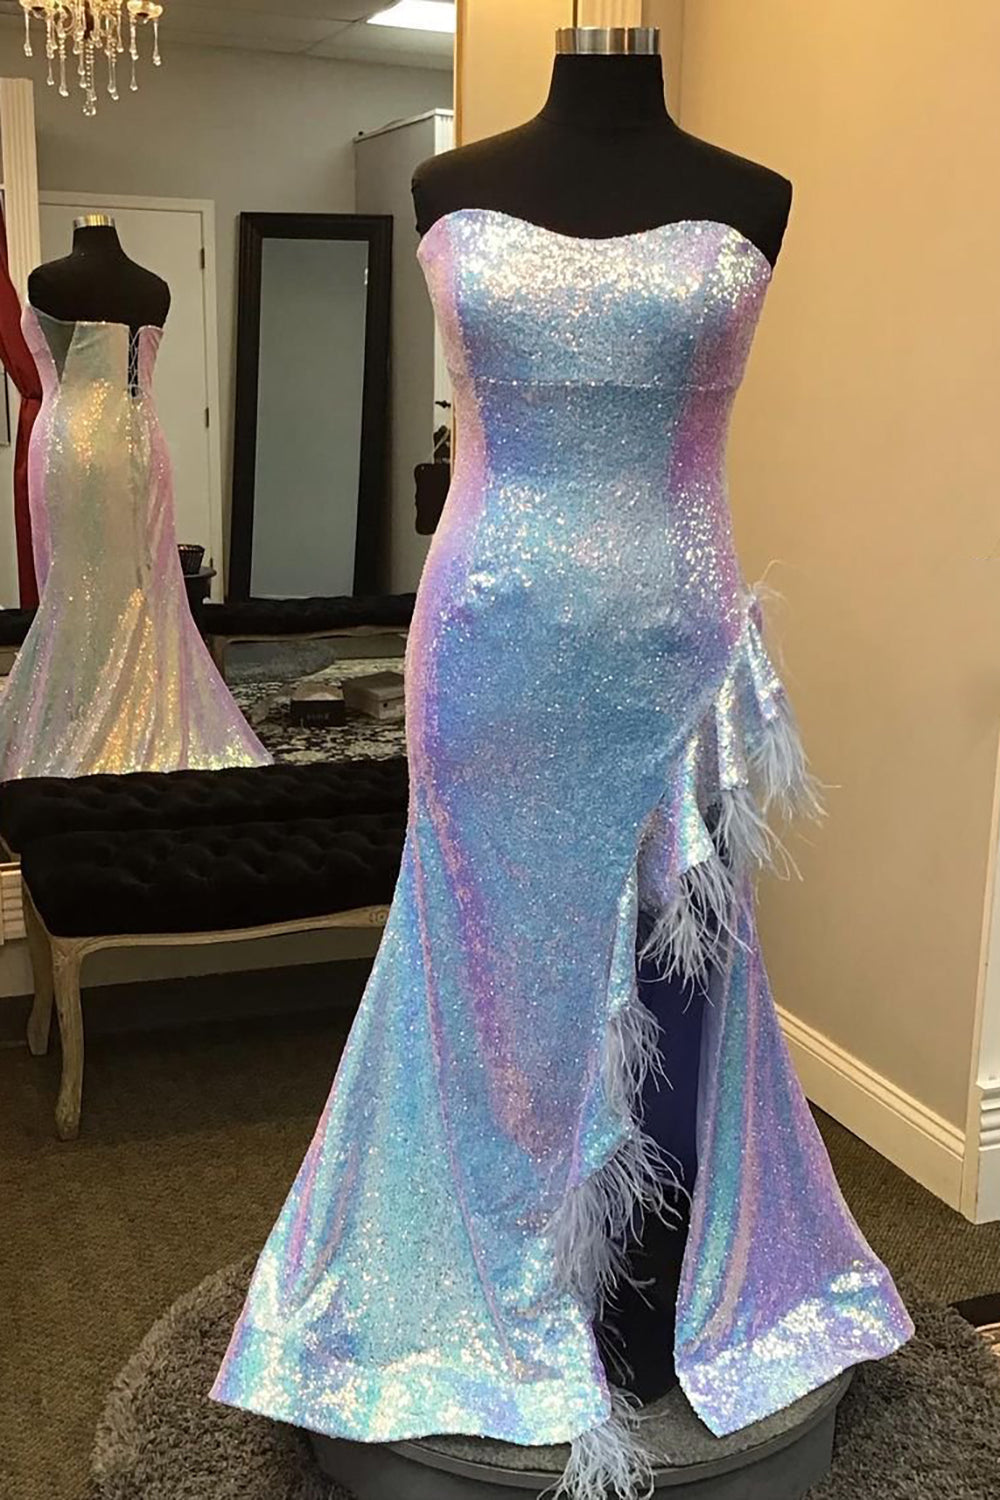 Party Dress Dress Up, Plus Size Light Blue Sweetheart Mermaid Sequins Long Prom Dress with Feathers